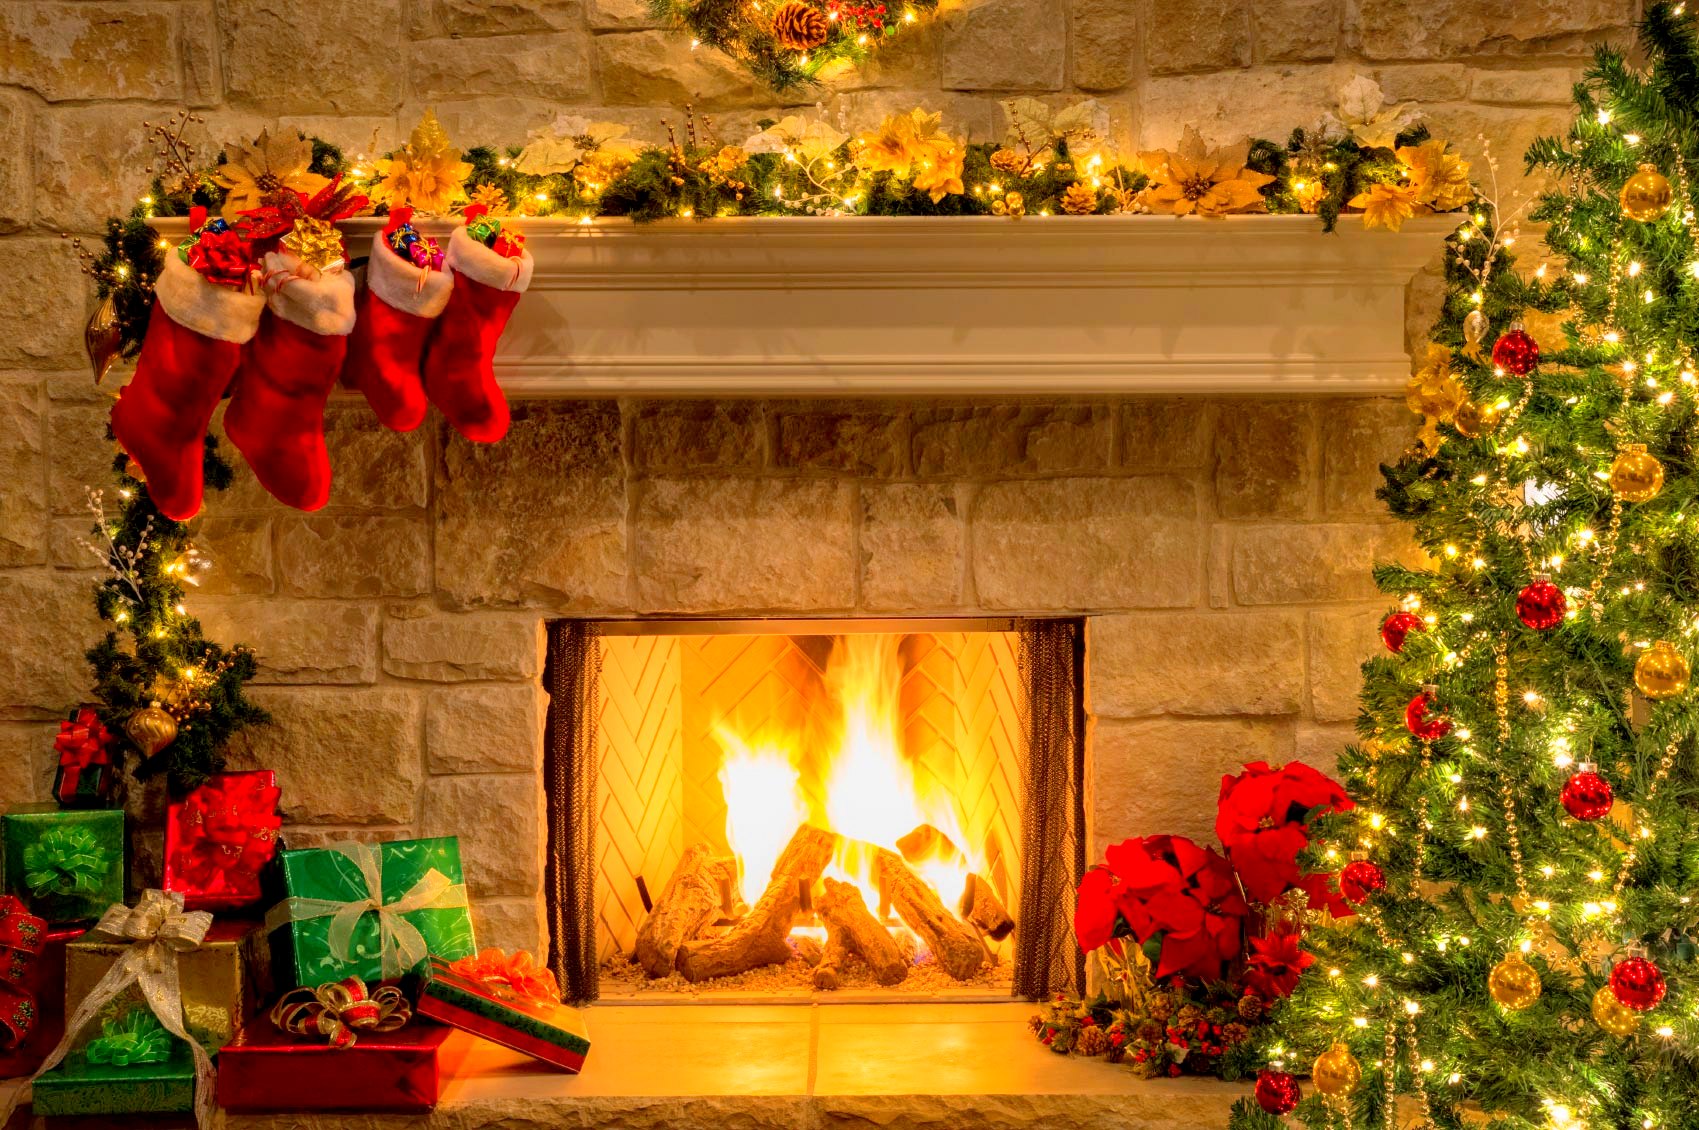 Canadian Christmas Traditions Christmas Fireplace Google image from https://www.educationquizzes.com/education-matters/2015/12/the-history-behind-christmas-traditions/